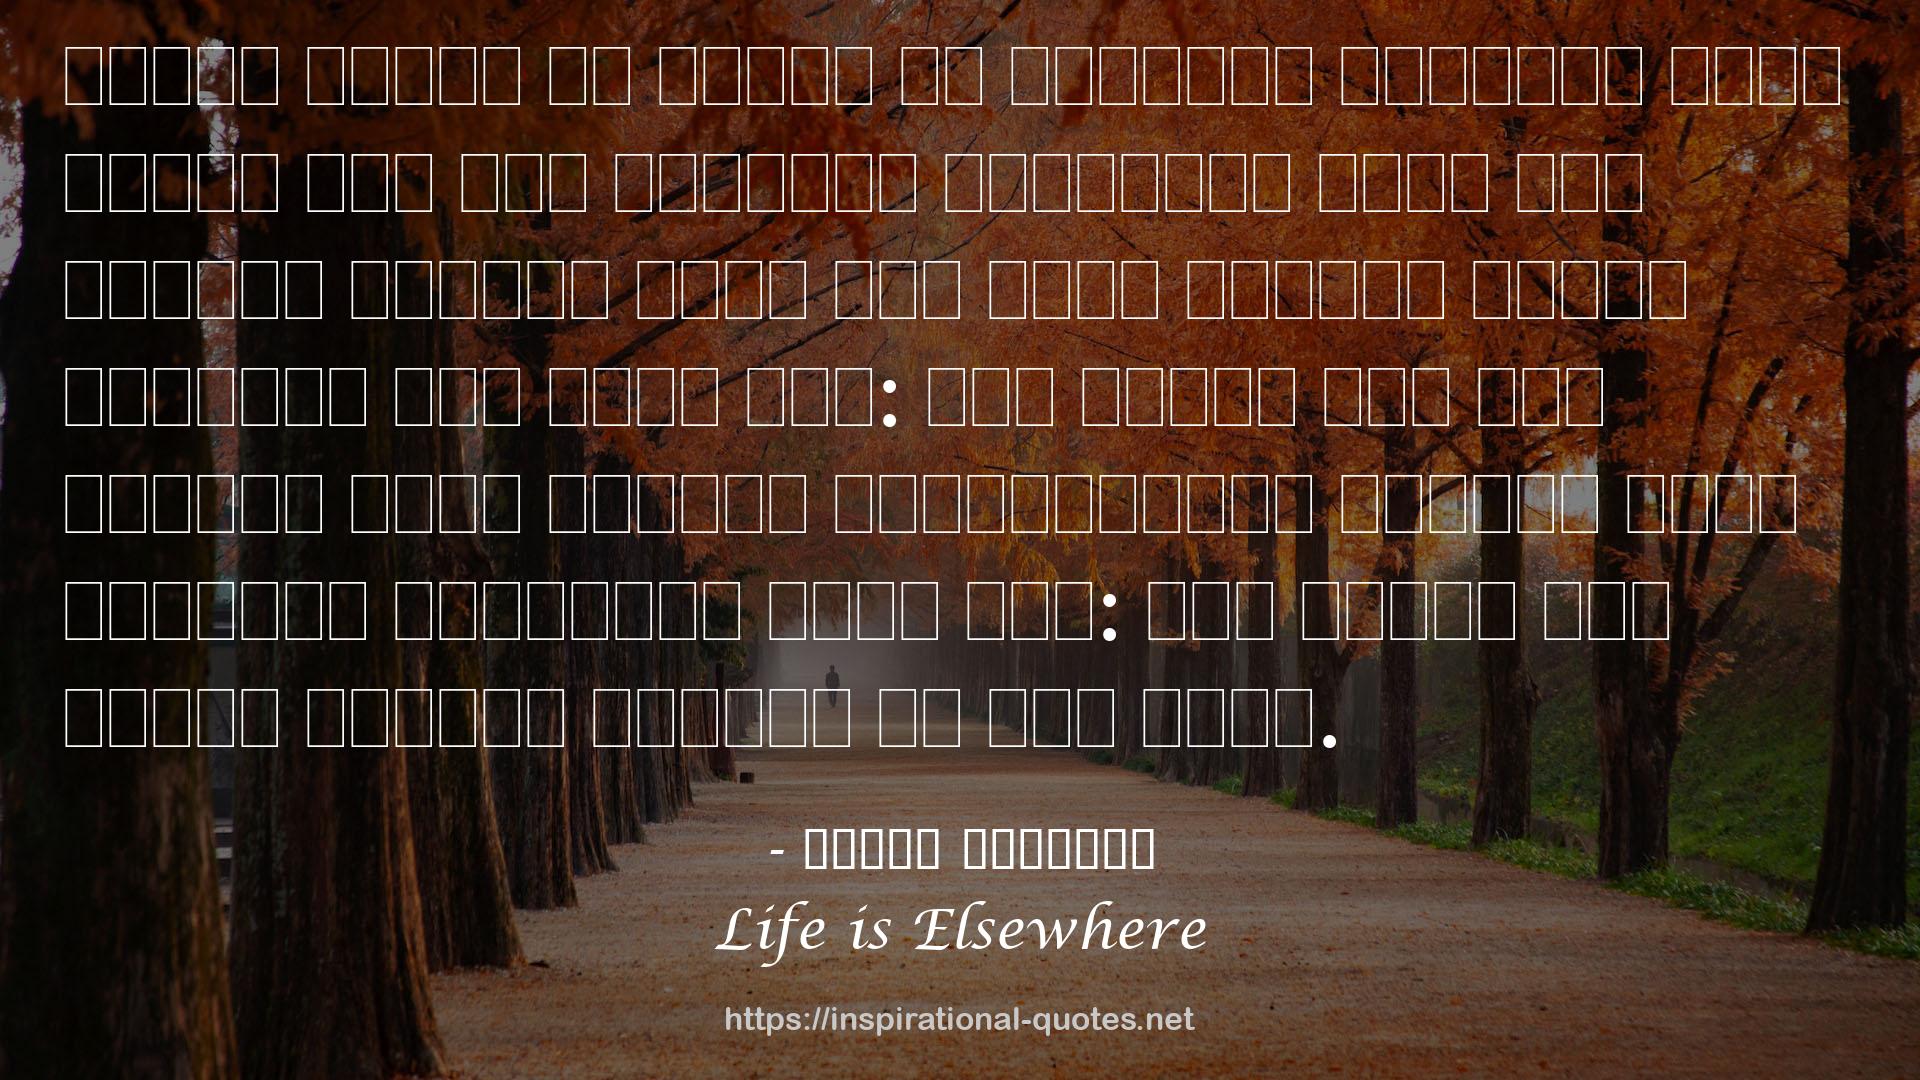 Life is Elsewhere QUOTES